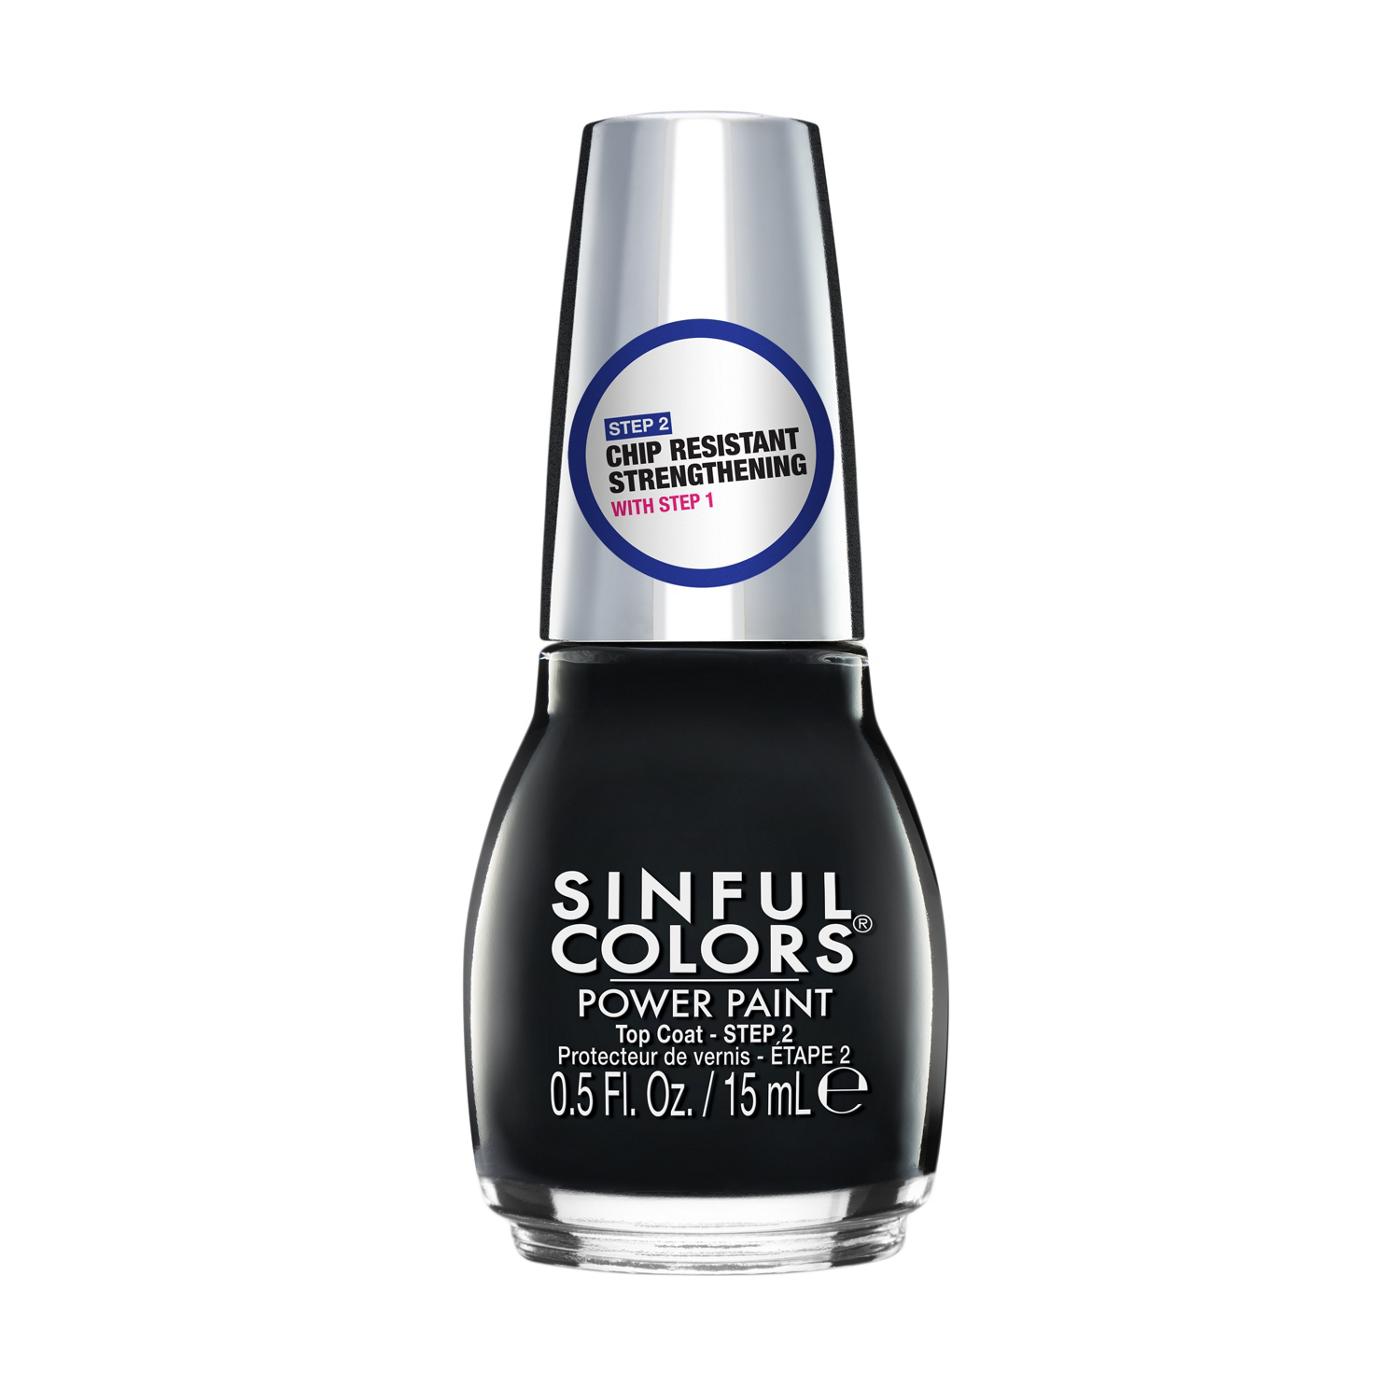 Sinful Colors Power Paint Nail Polish Strengthening Top Coat; image 1 of 4